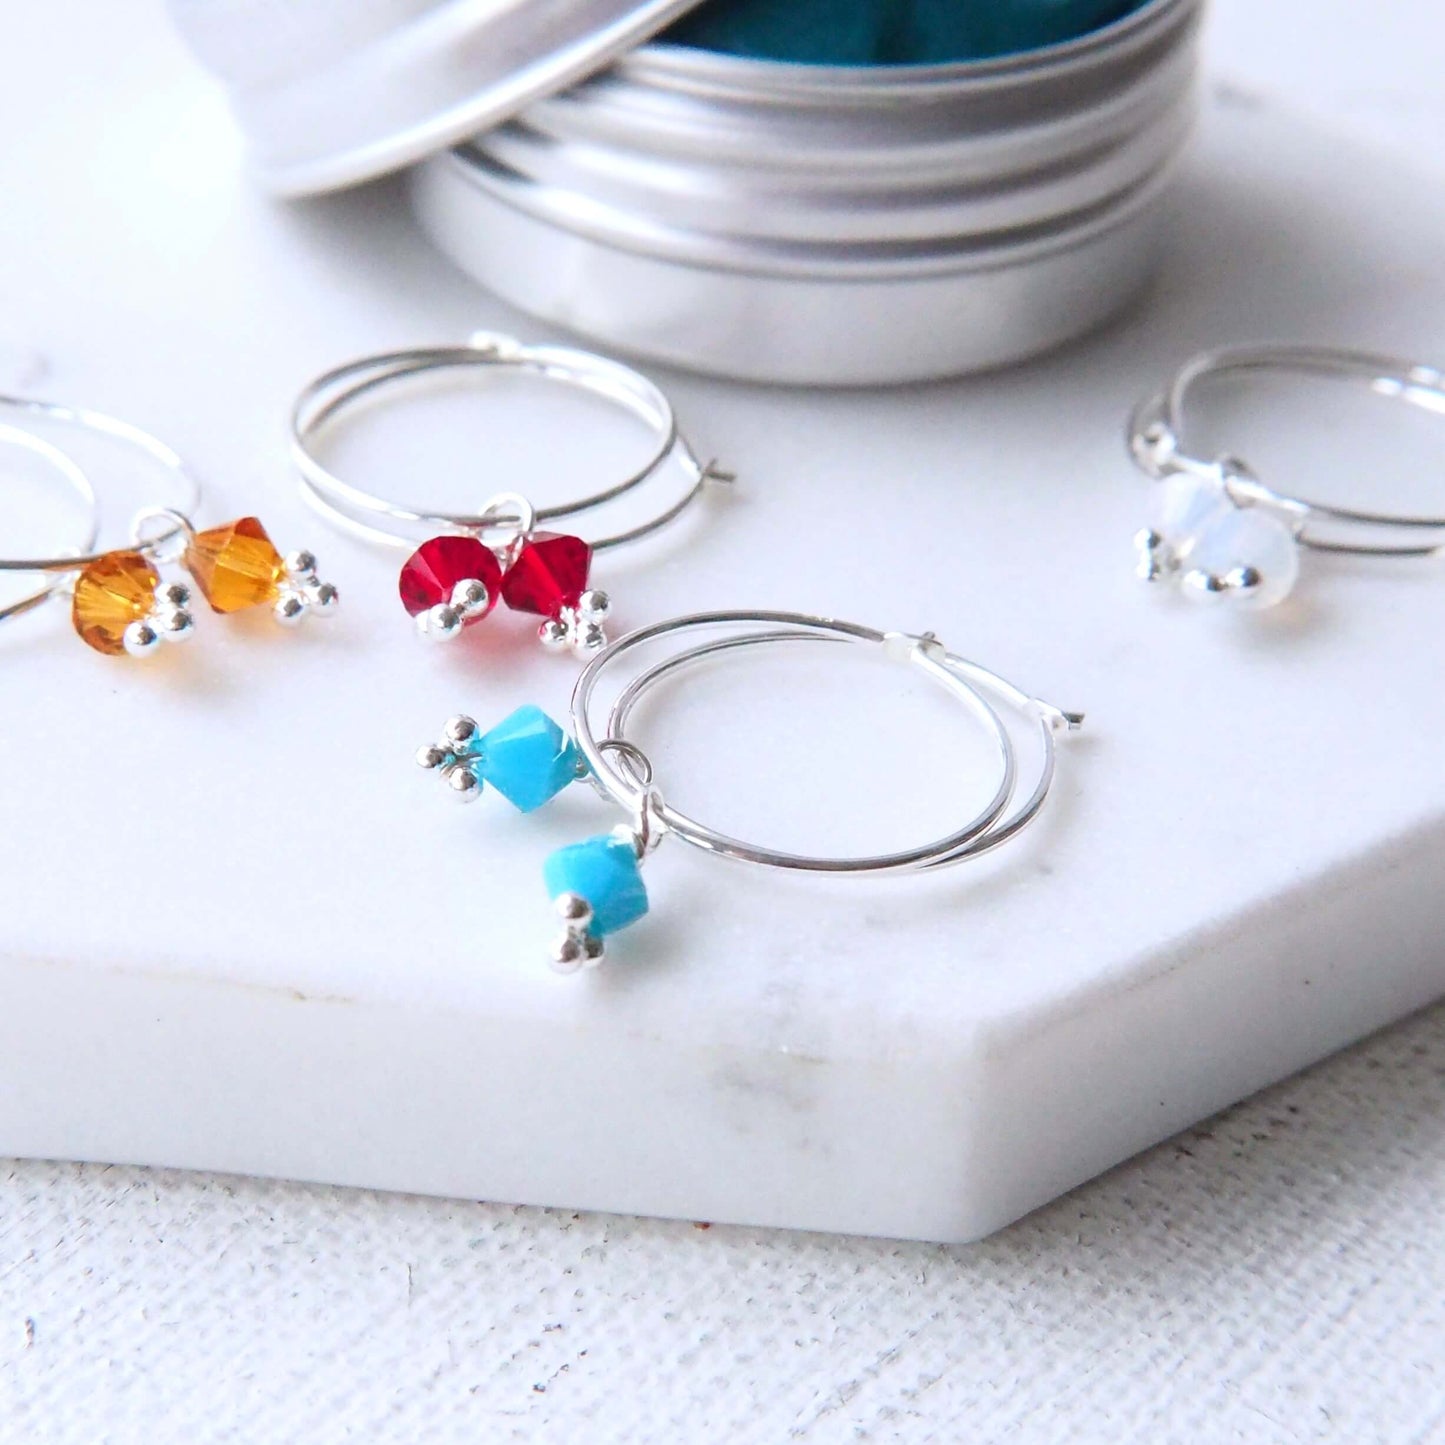 Birthstone hoops with wire hoops and a birthstone crystal pictured on a white marble background with December Turquoise, November Citrine January Garnet and October Opal variations. Handmade by maram jewellery in Scotland